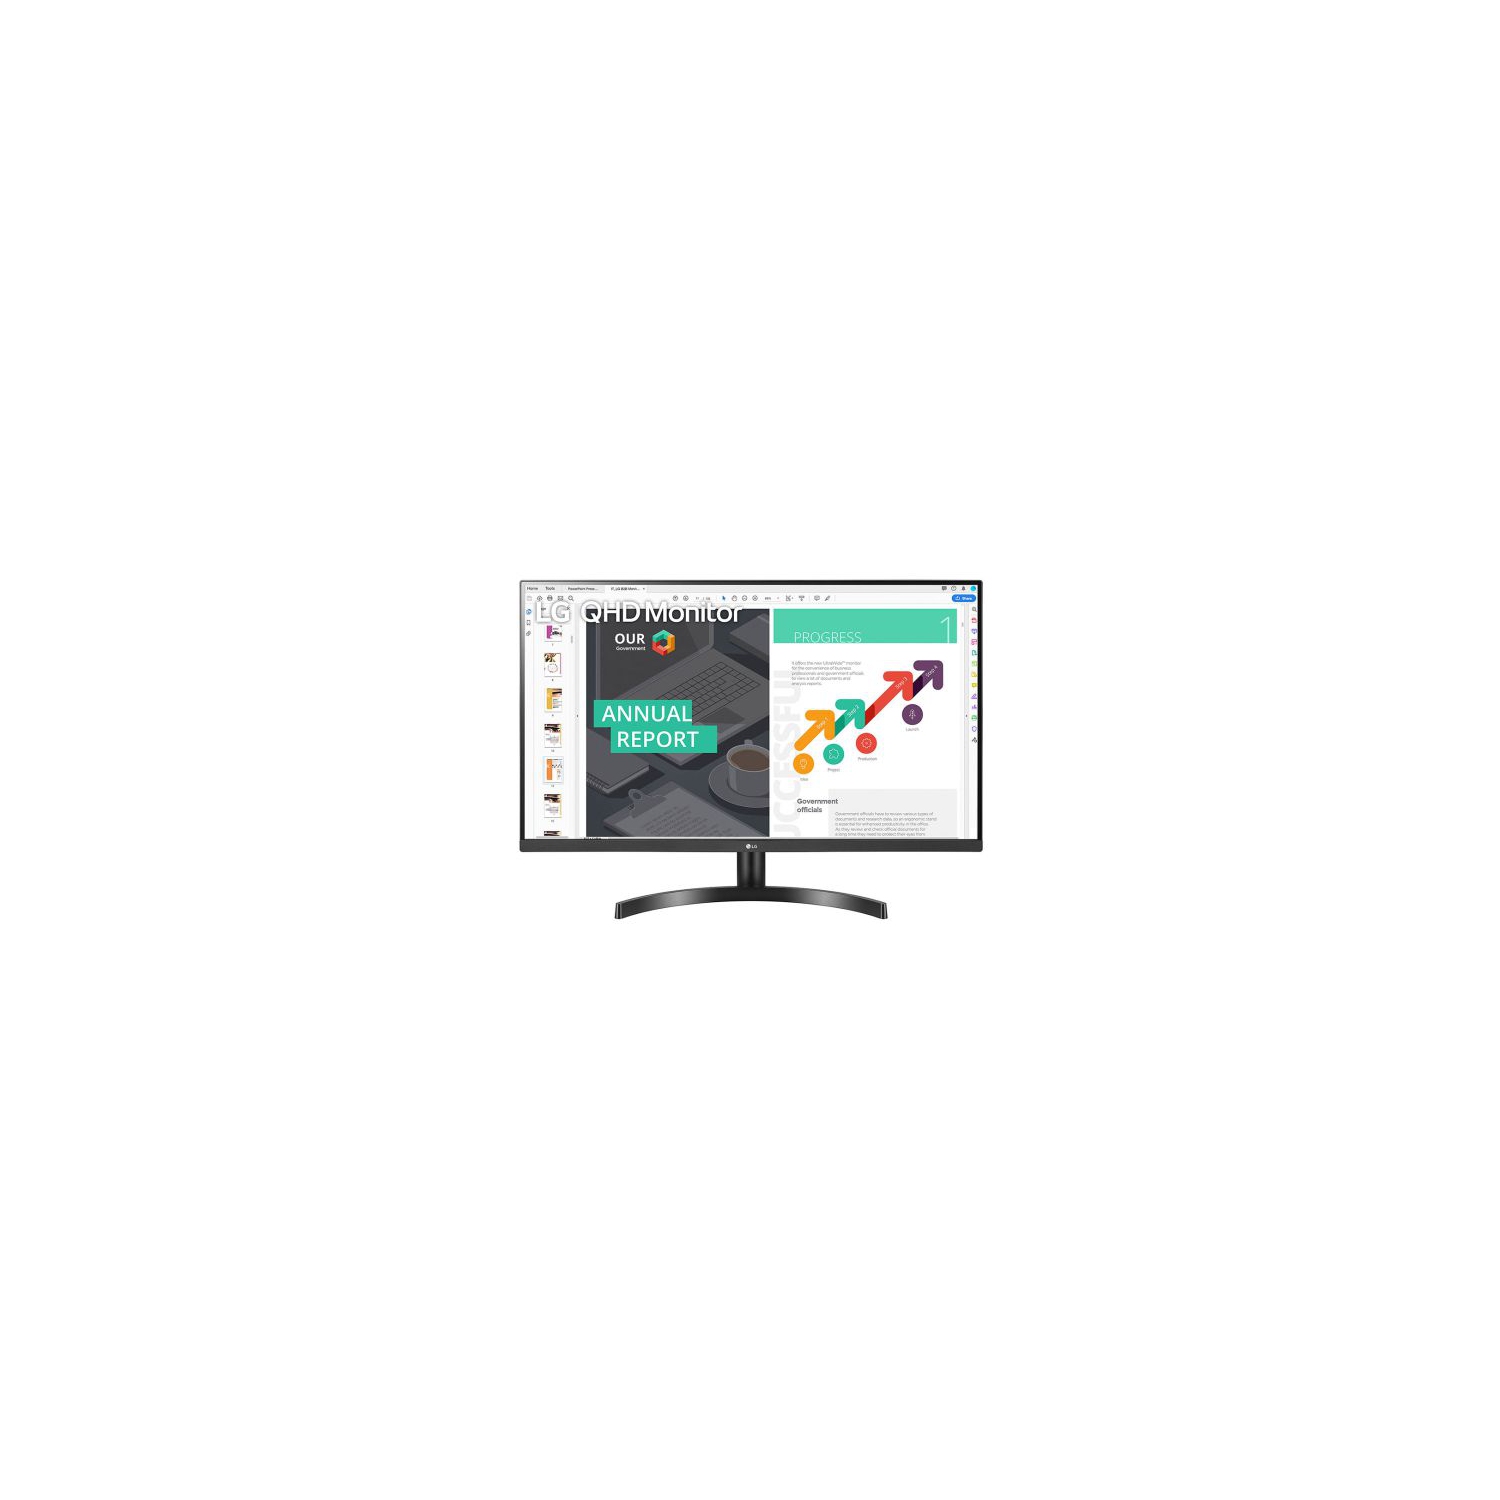 Refurbished (Excellent) - LG 32QN600 32" QHD Widescreen LED IPS Monitor - Certified Refurbished